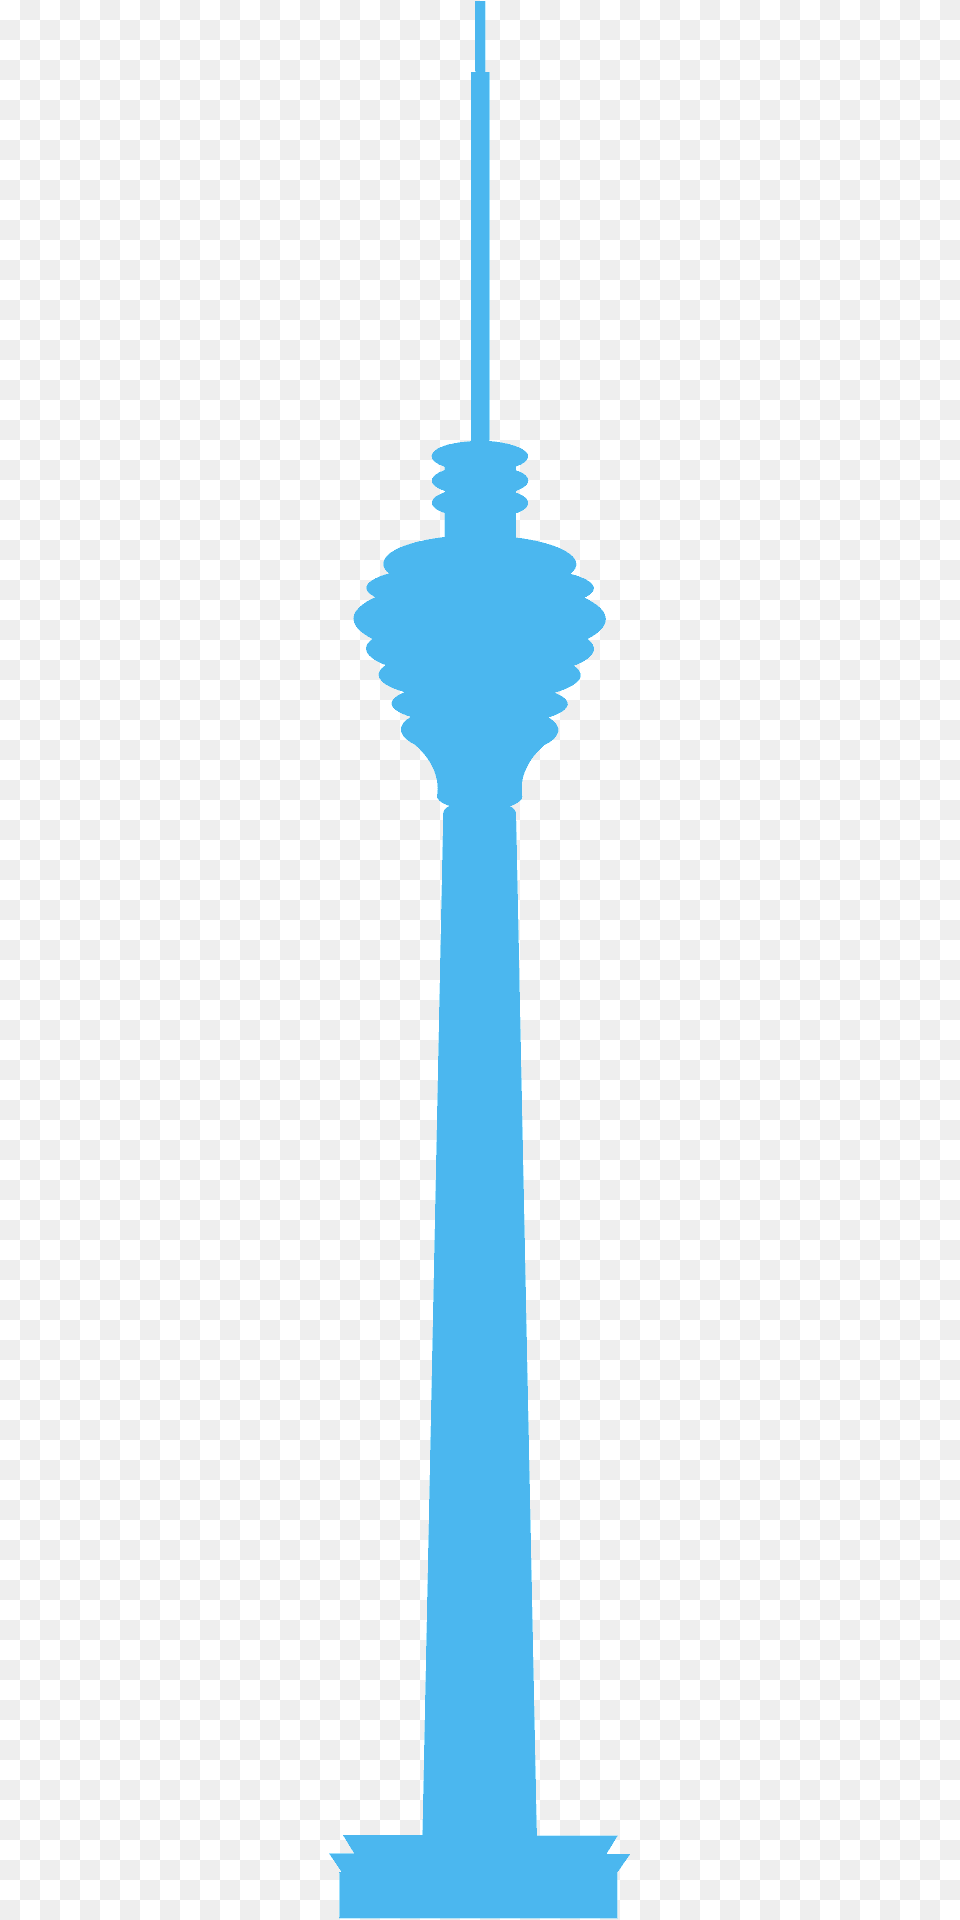 Kl Tower Silhouette, Architecture, Building, Spire, City Png Image